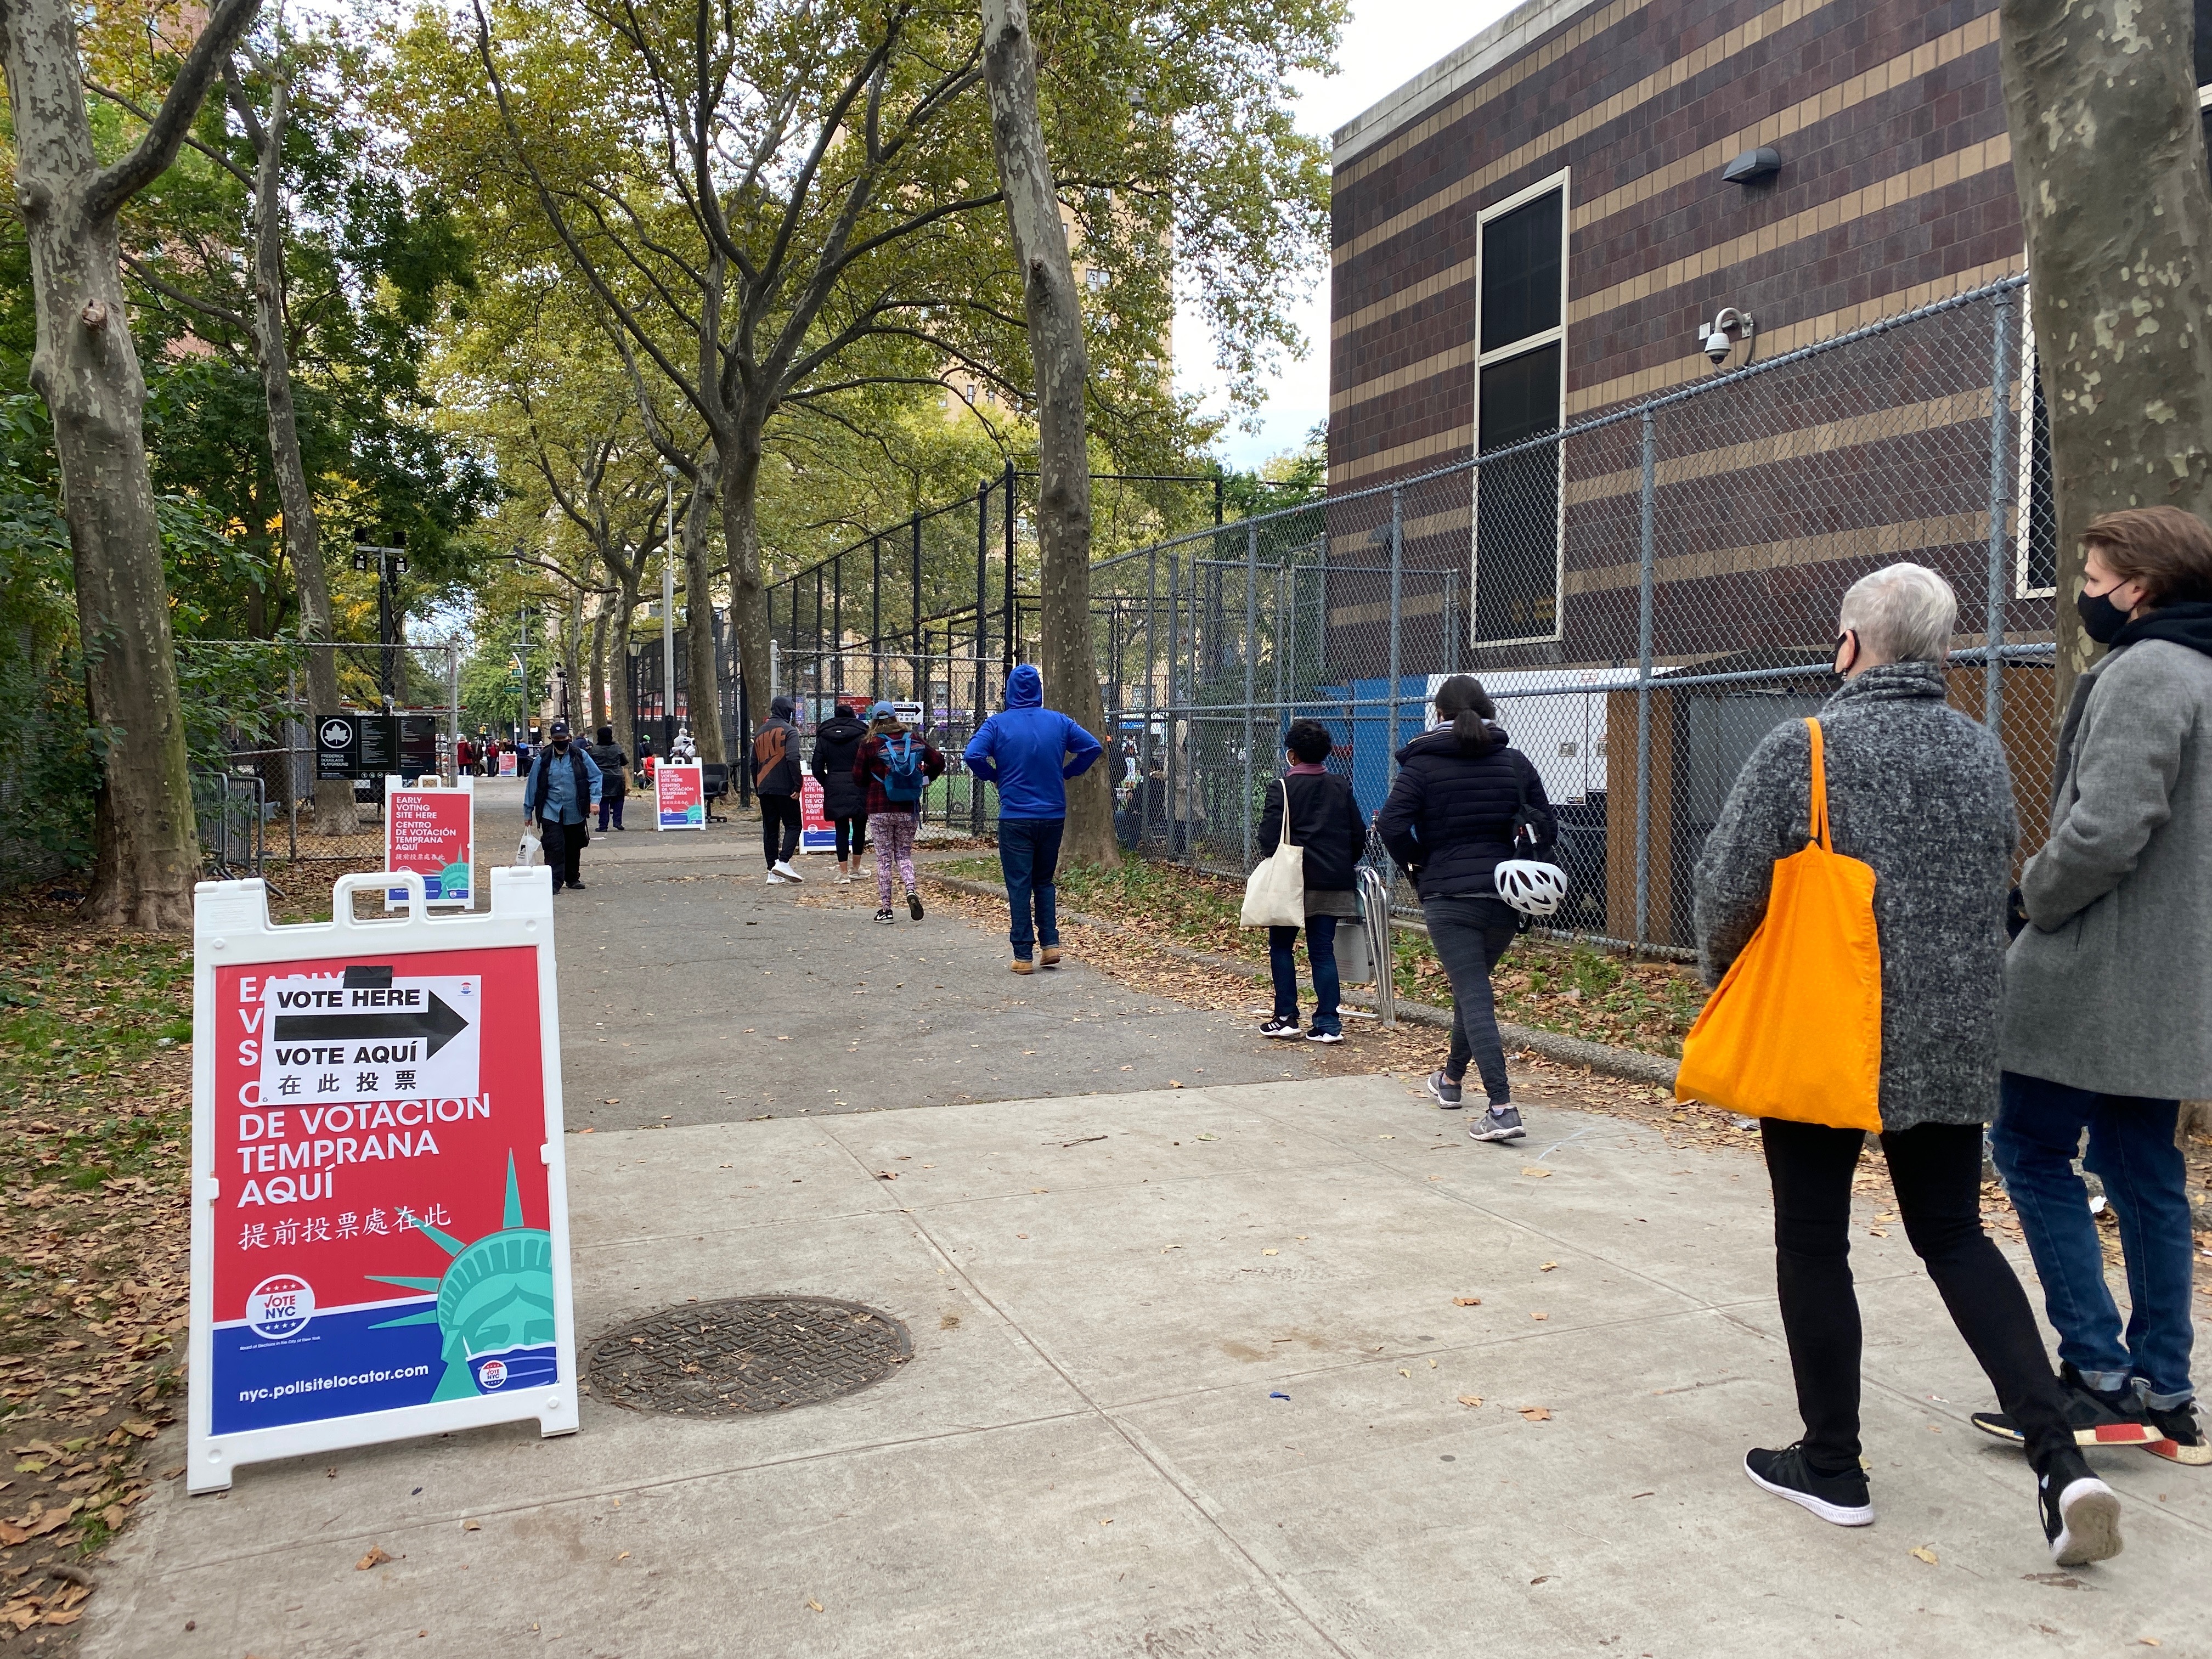 Early voting lines on the Upper West Side on West 102nd Street on October 25th, 2020.